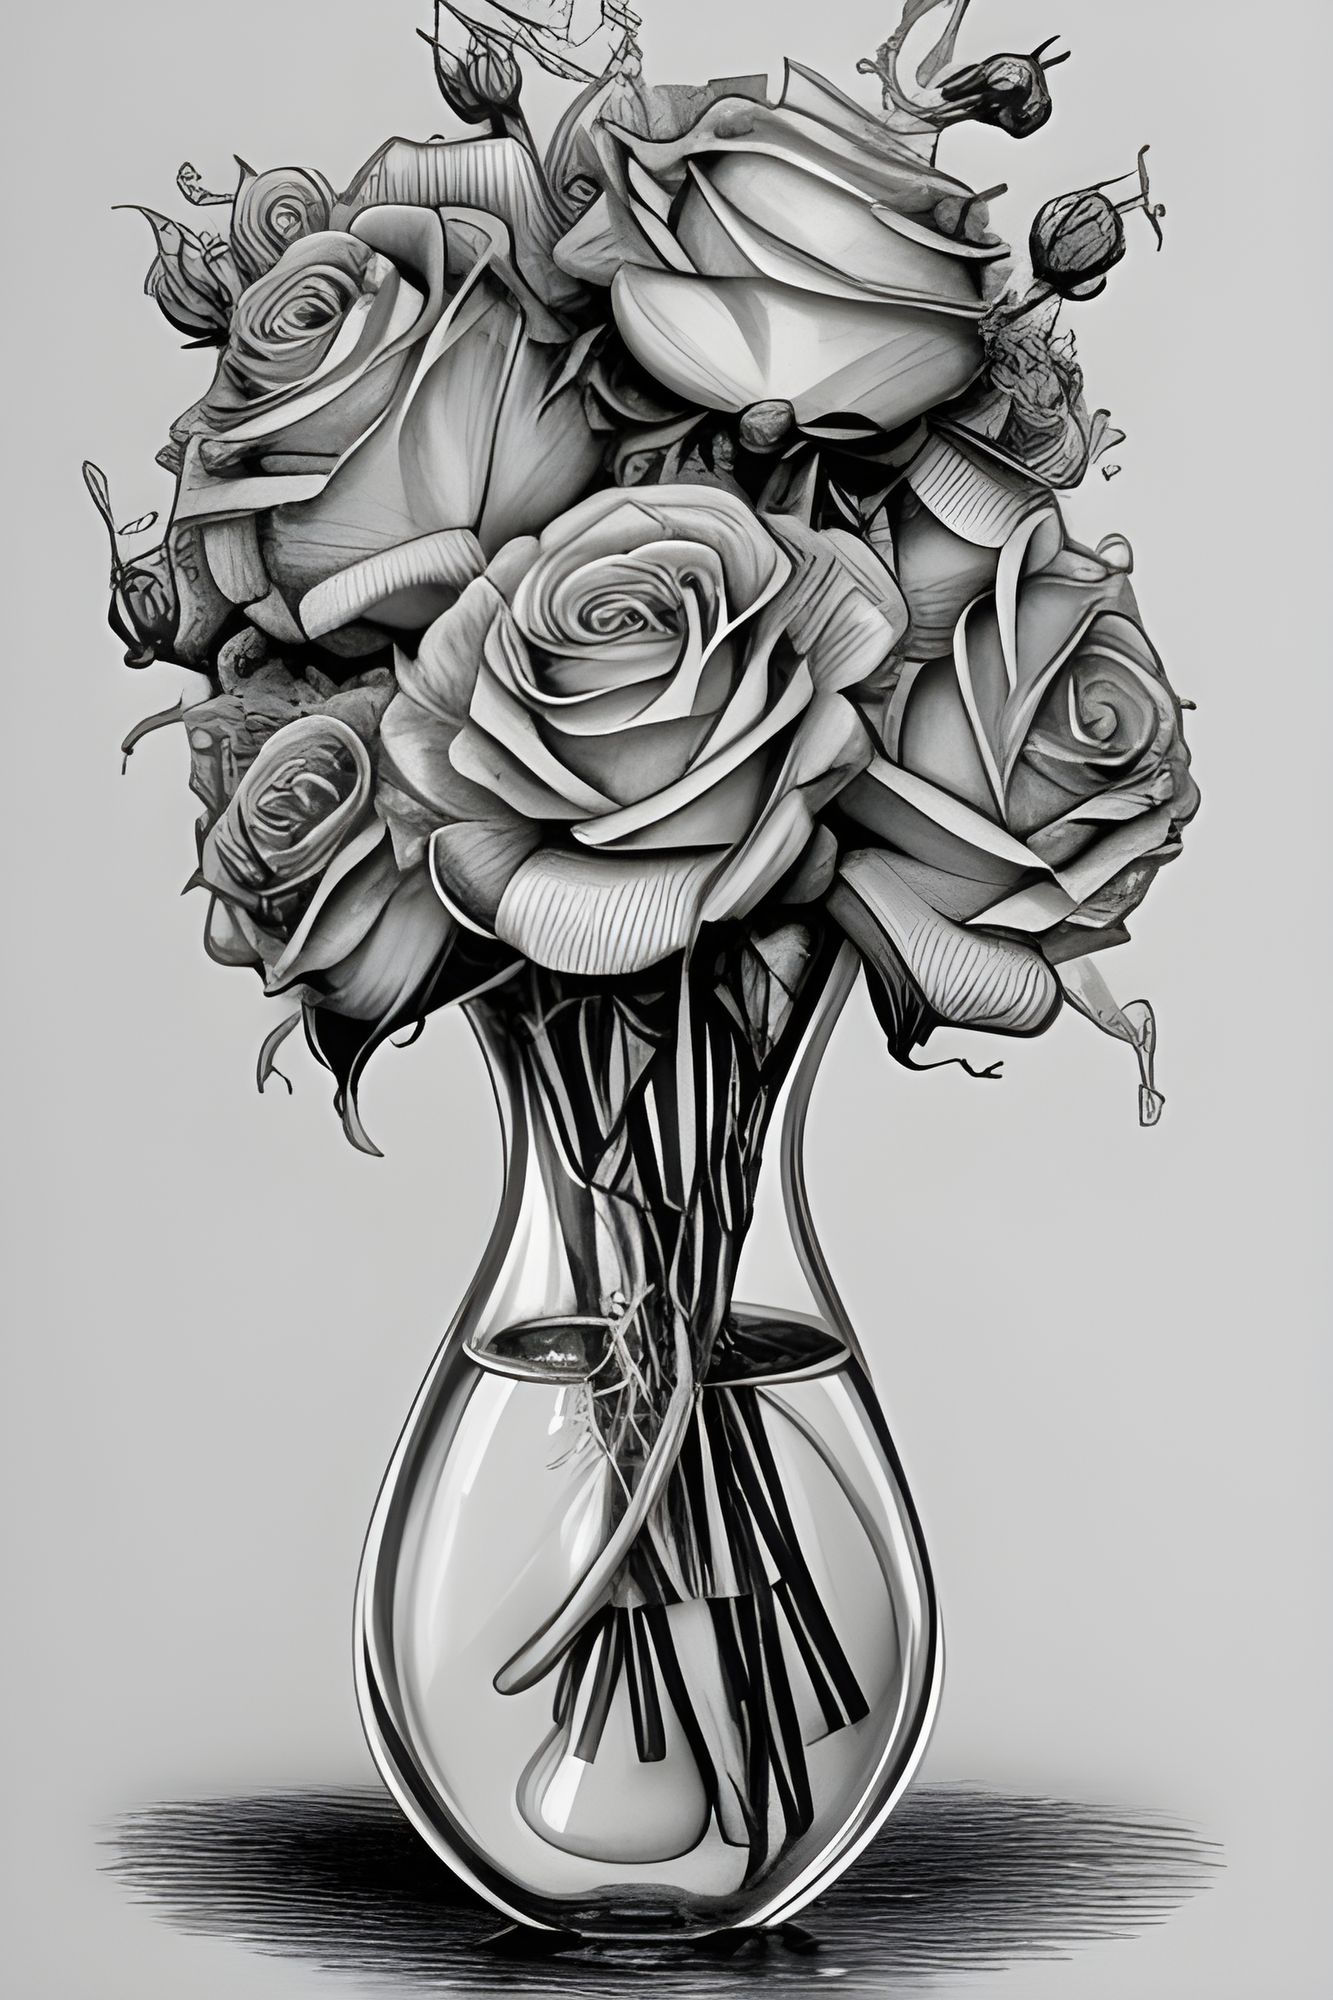 Rose Sketch Stock Photos and Images - 123RF